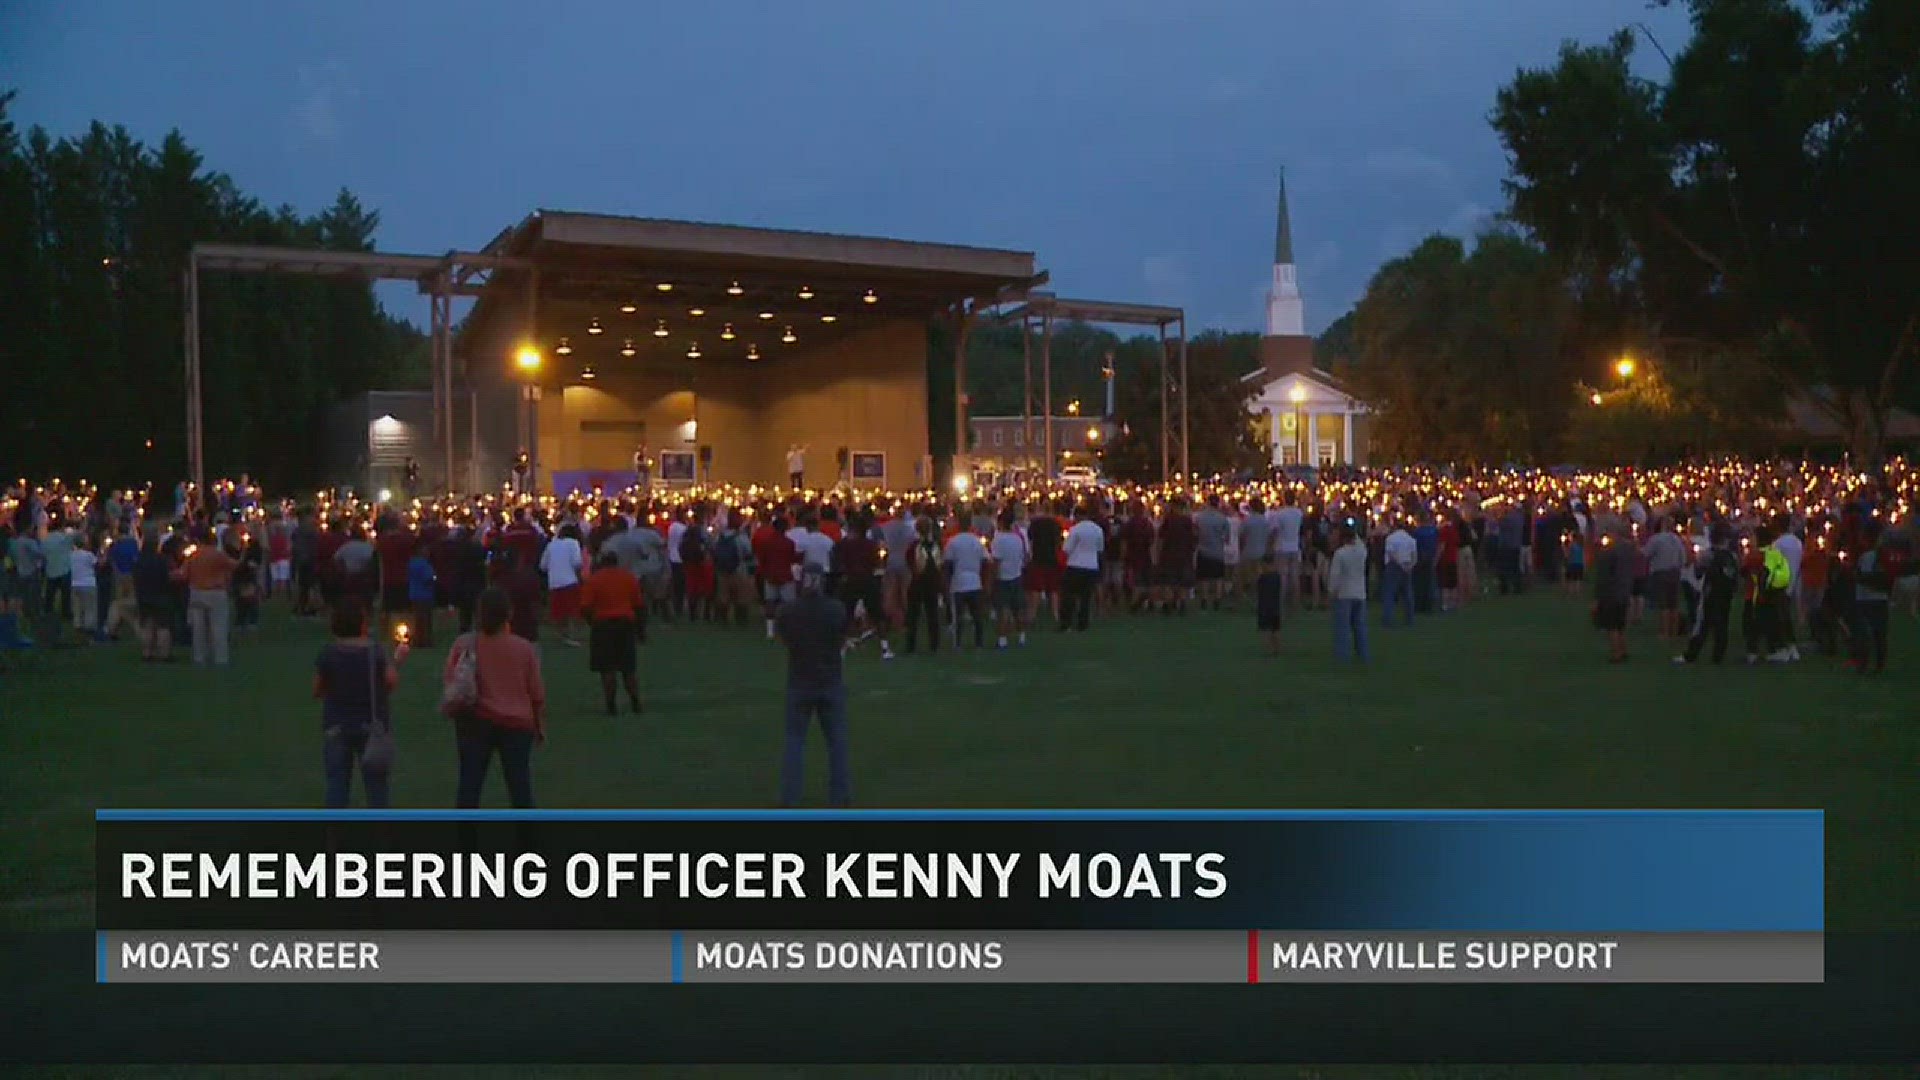 Hundreds of people gathered in Maryville Friday night at a candlelight memorial for fallen Maryville Police Officer Kenny Moats.